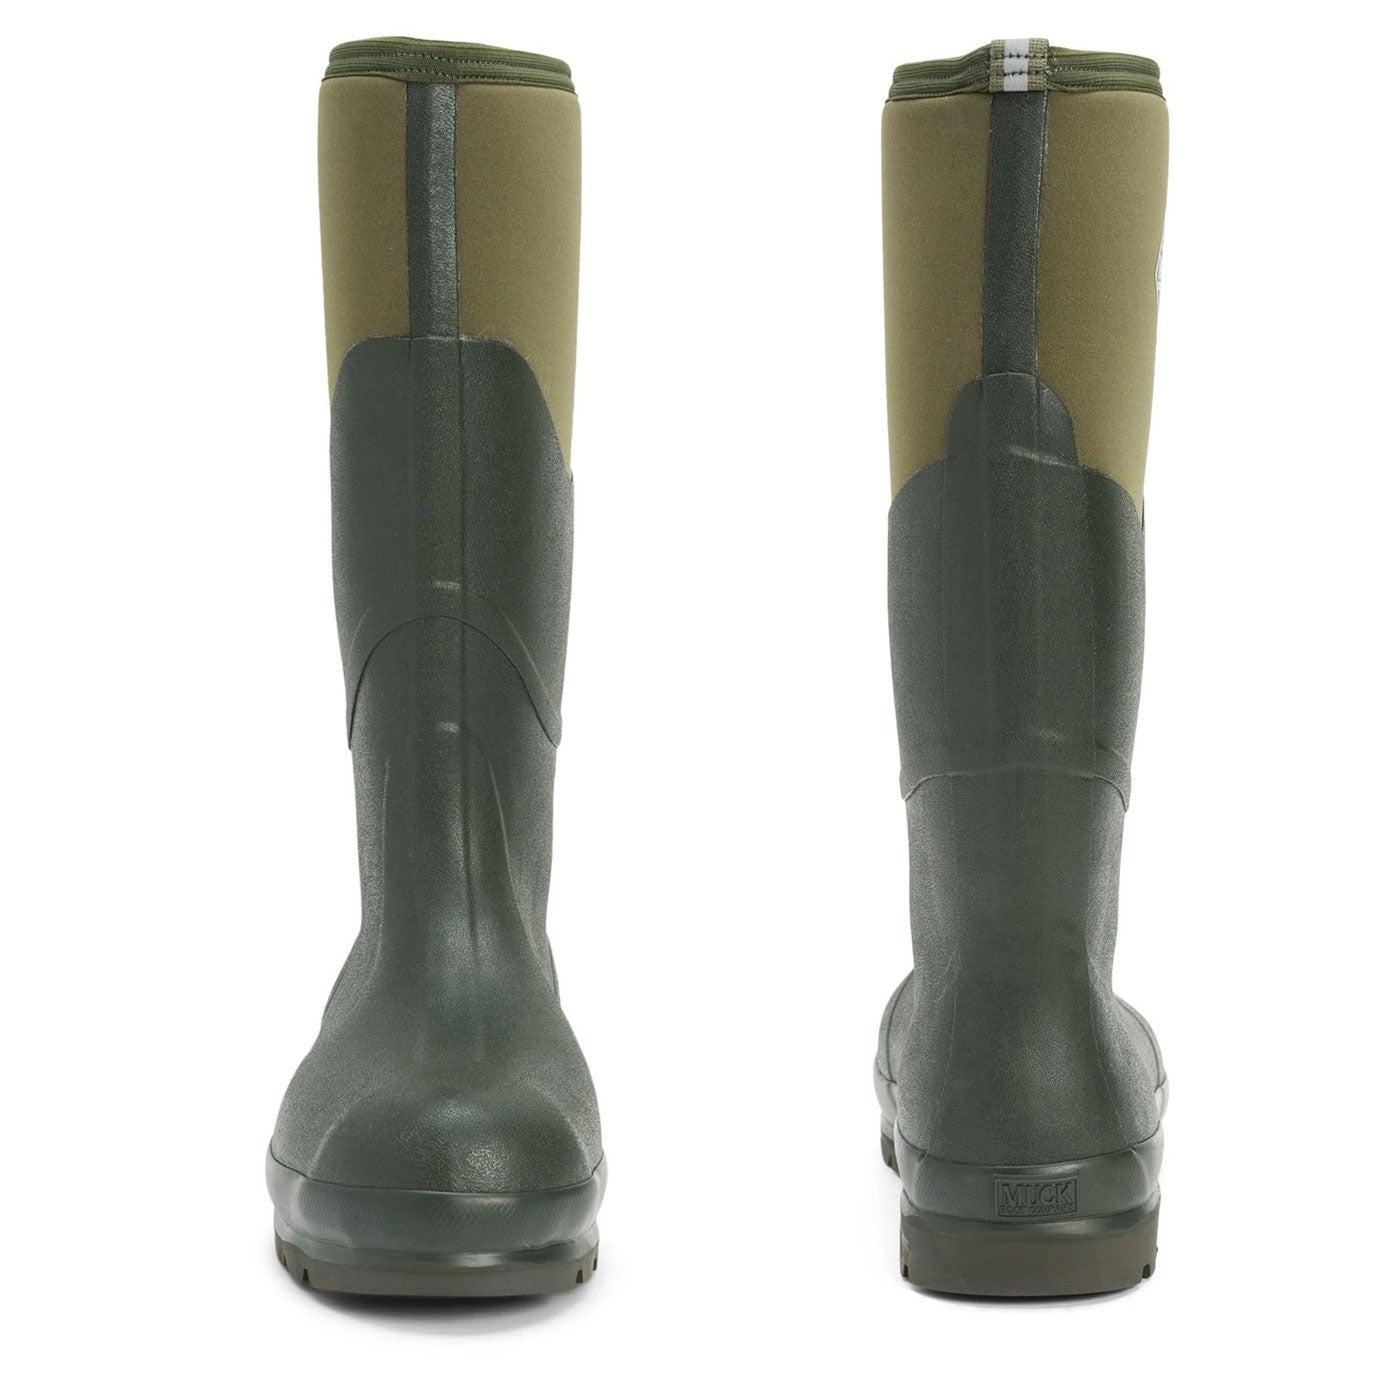 Toe and heel Muck Boots Chore 2K Tall Boots